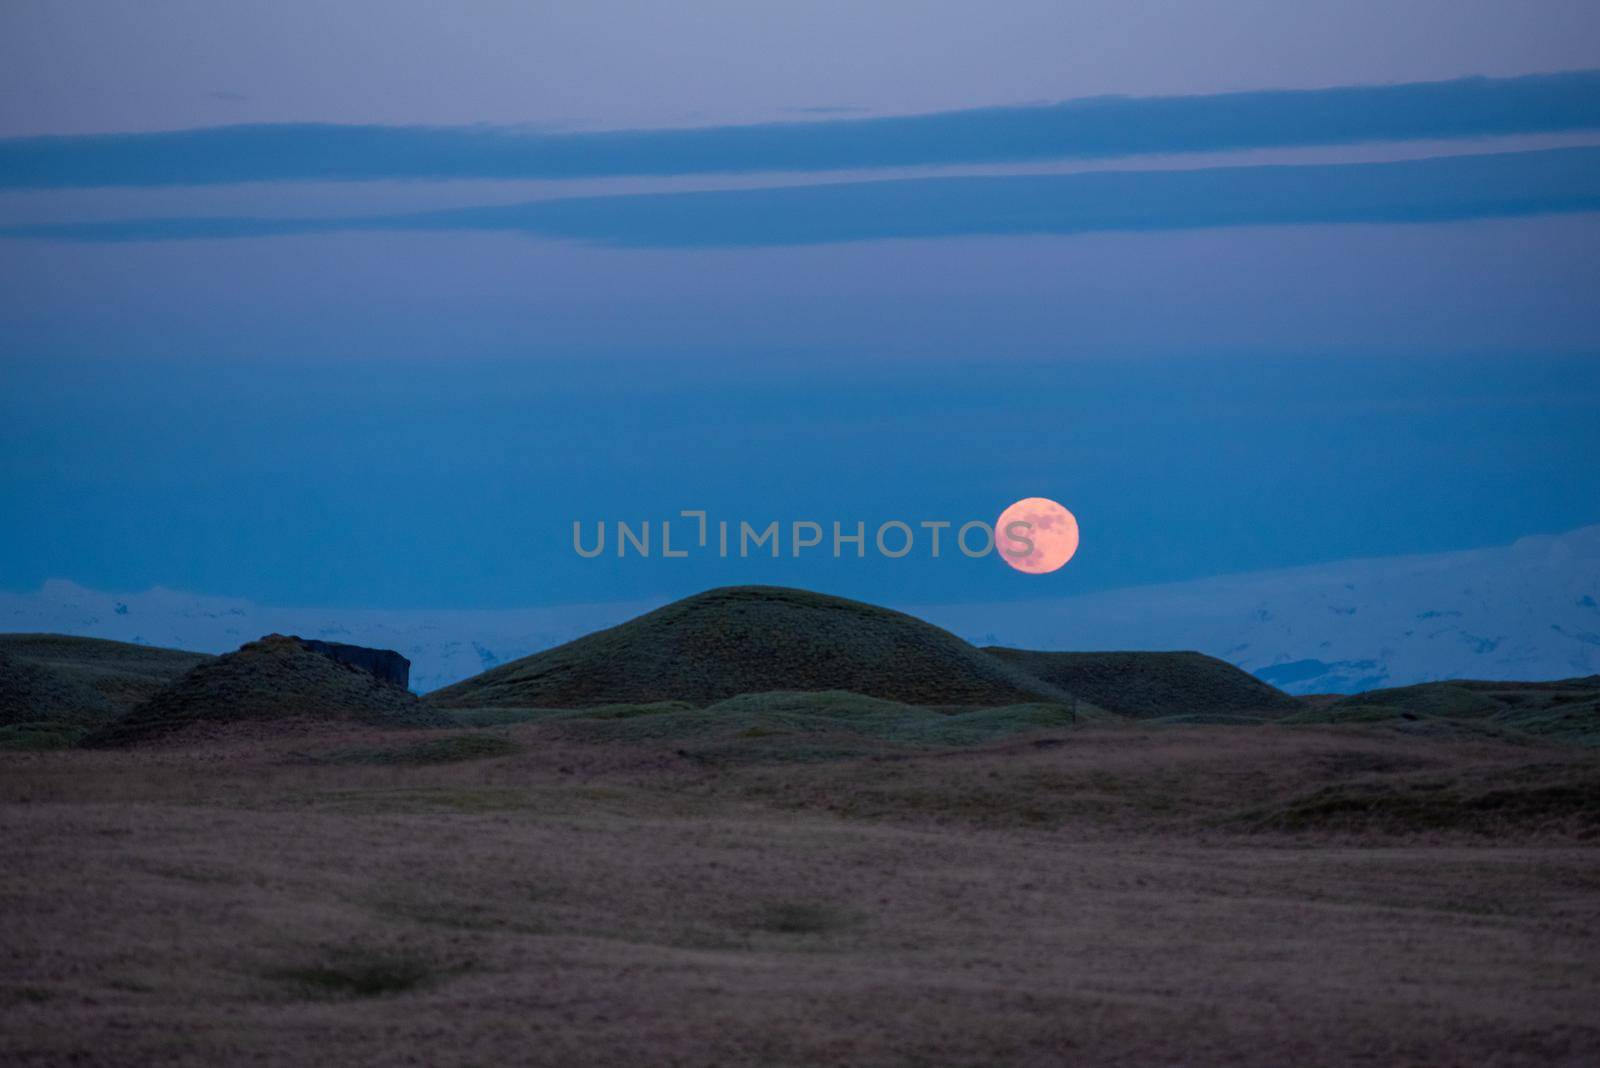 Full moon rise over Iceland glacier with rolling hills in the foreground by jyurinko